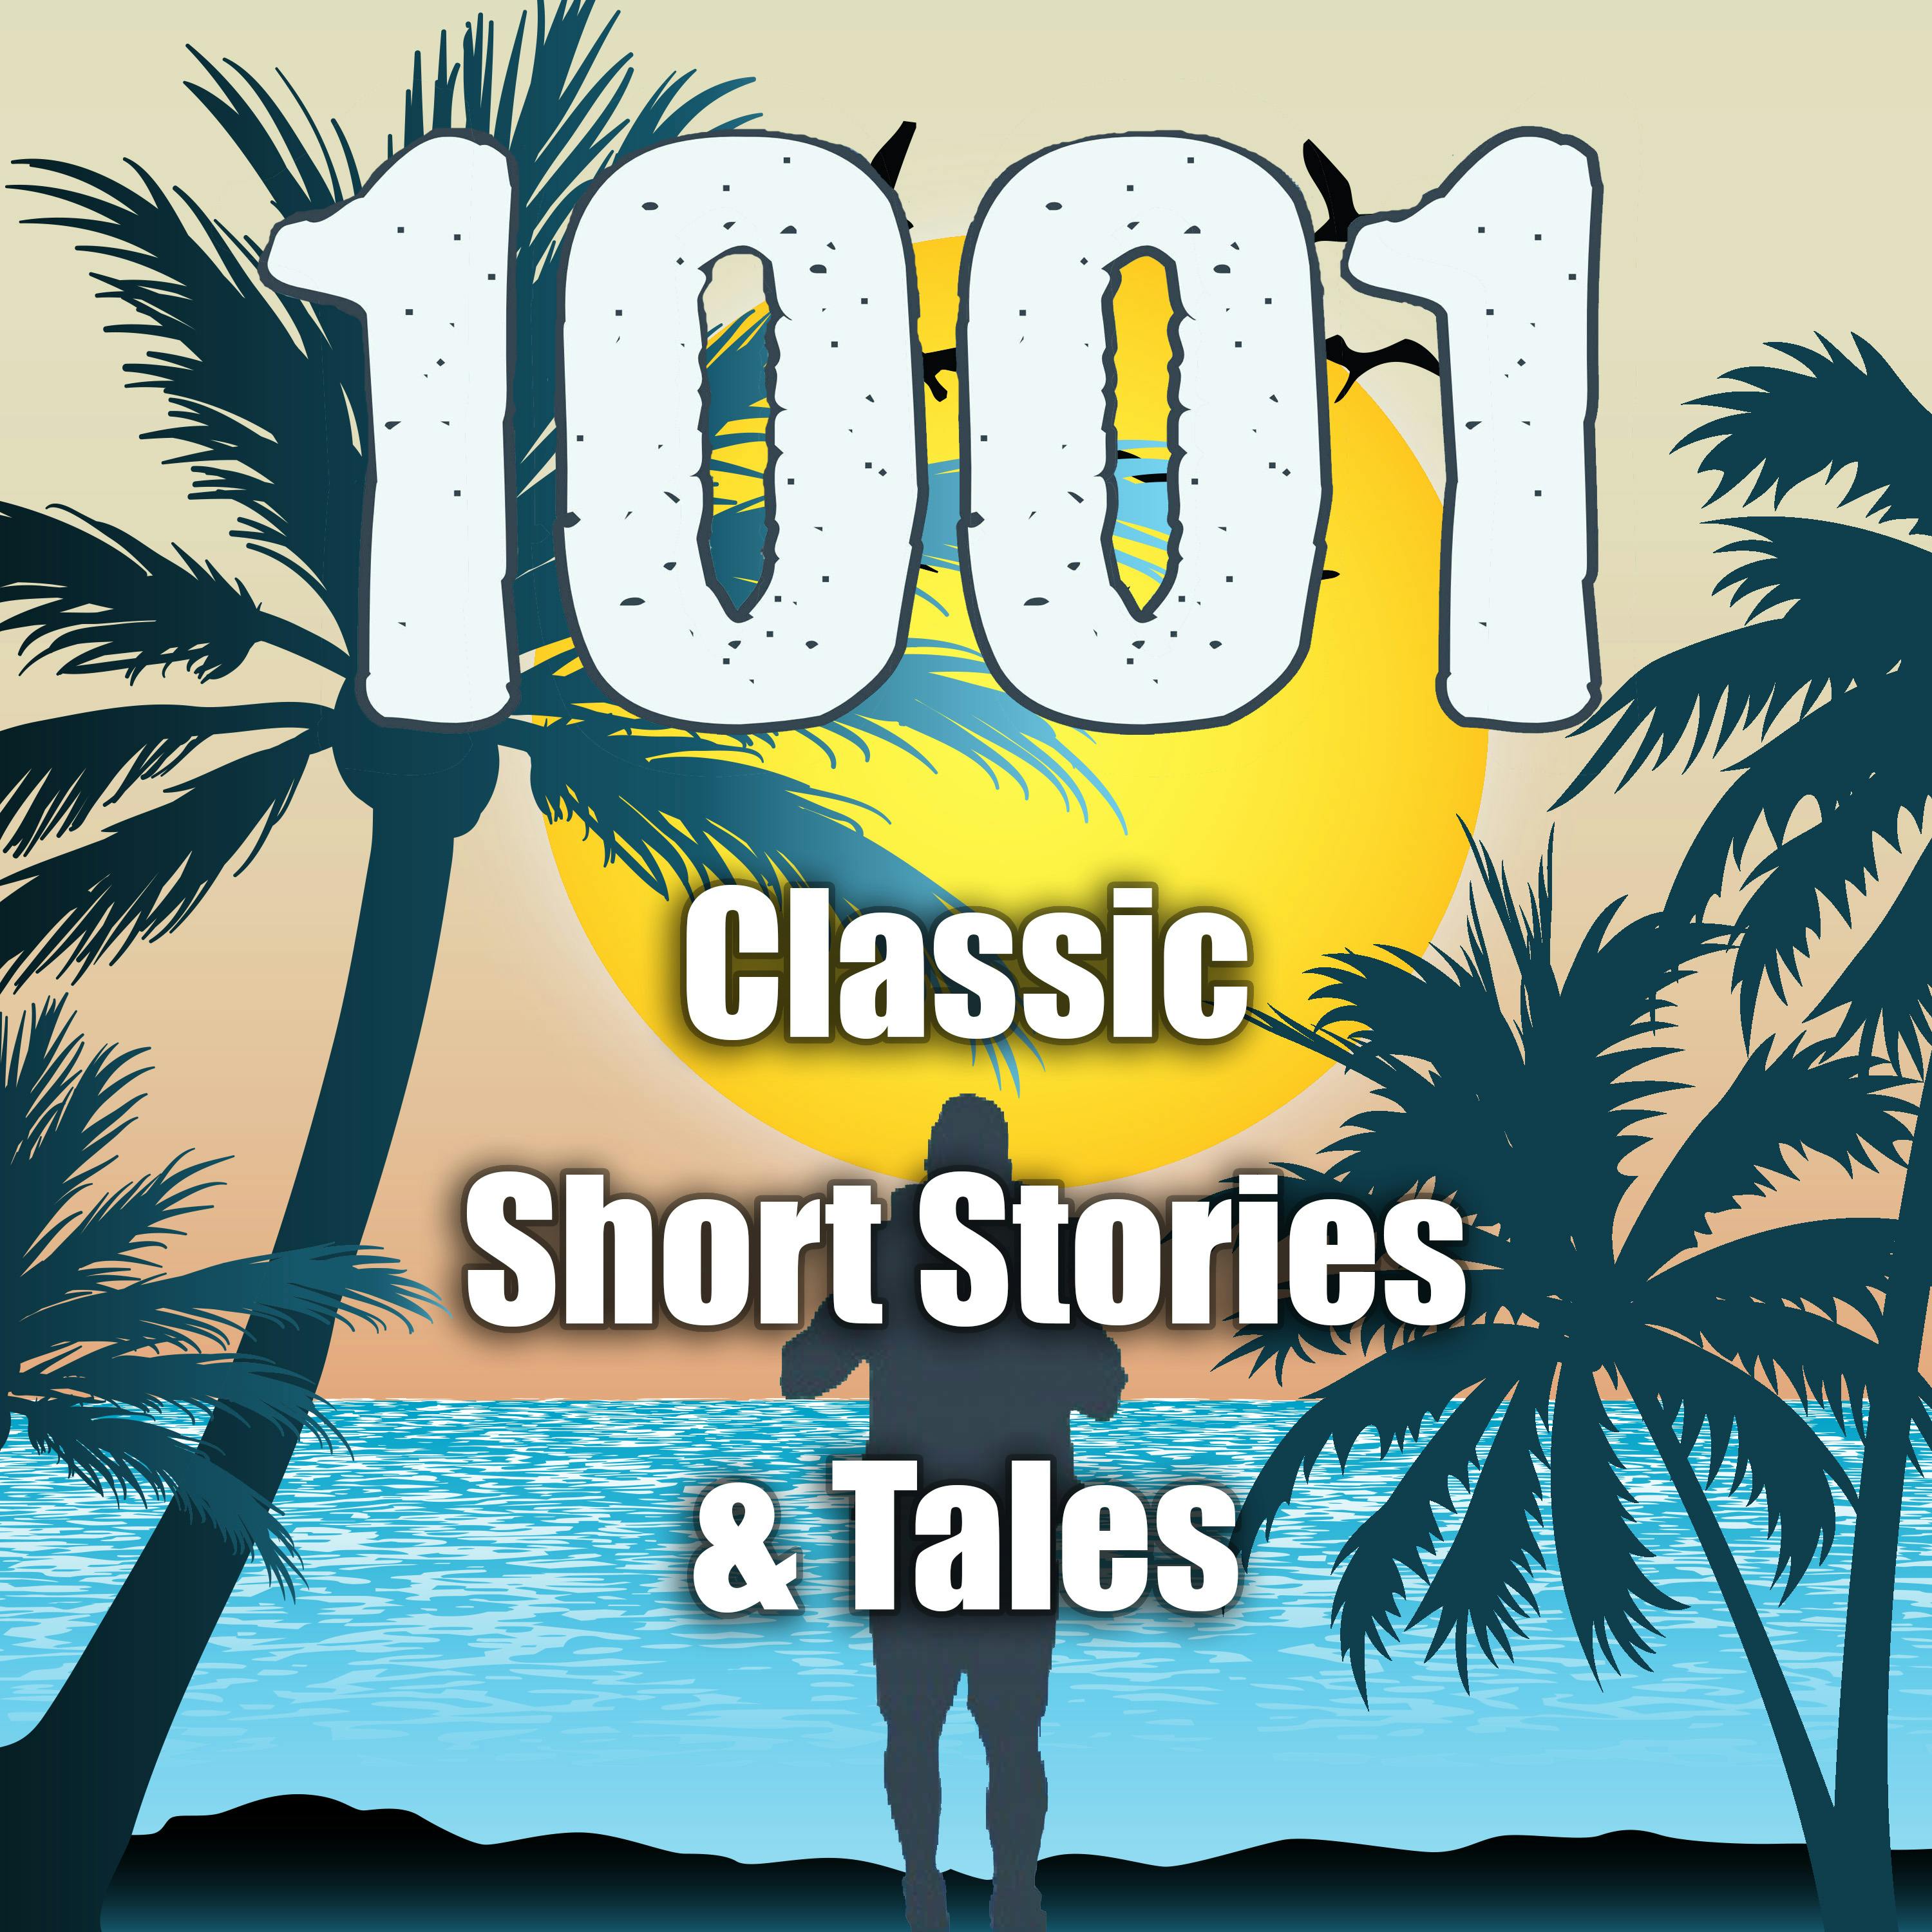 "1001 Classic Short Stories & Tales" Podcast